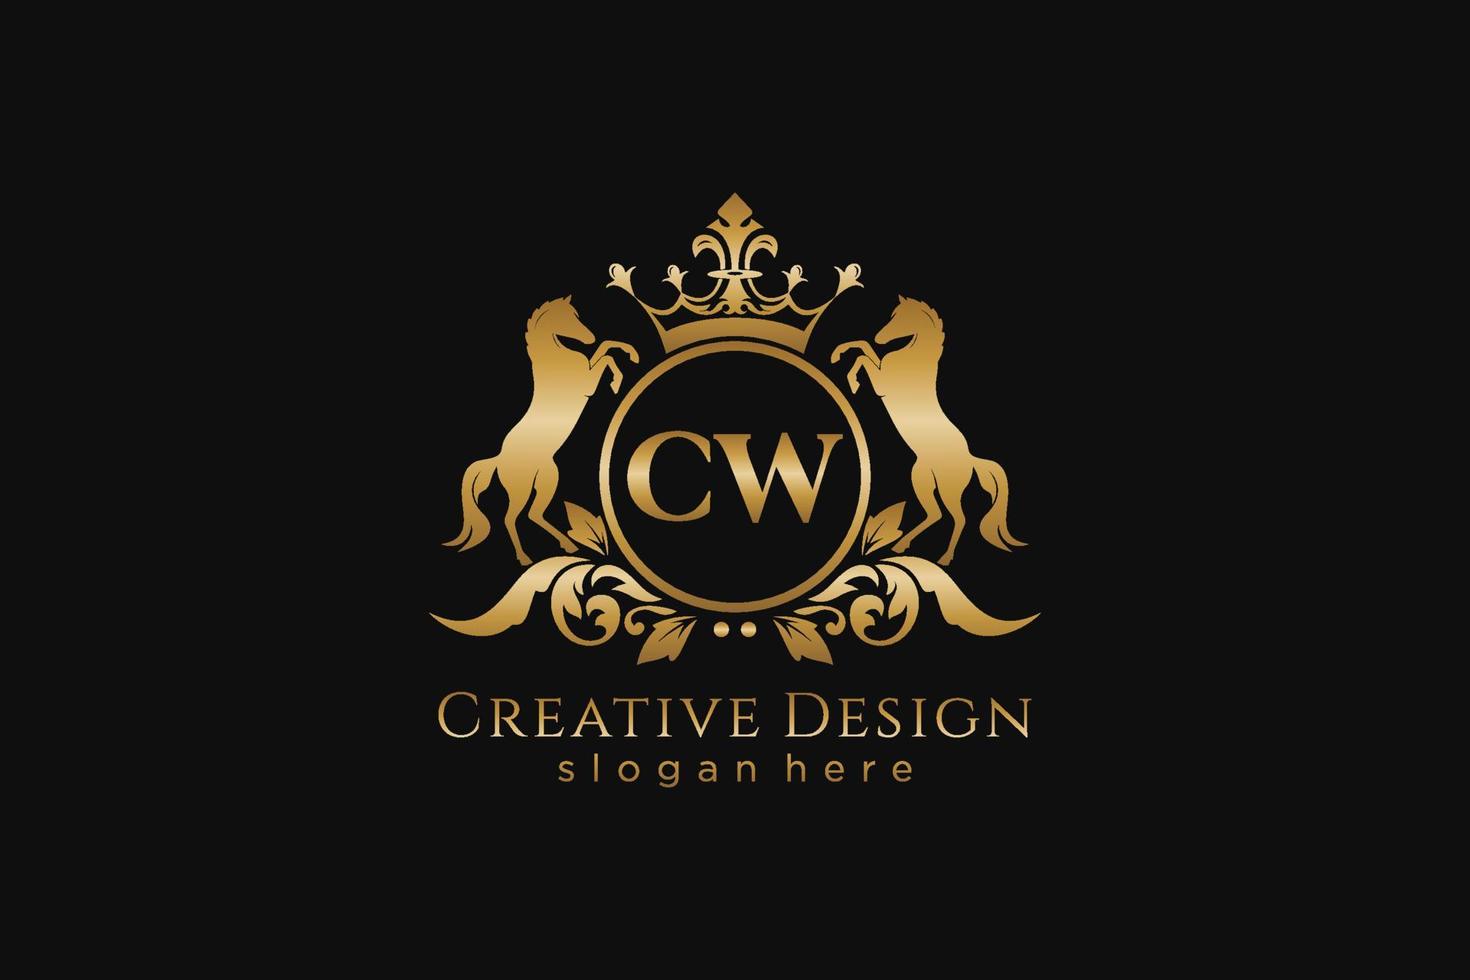 initial CW Retro golden crest with circle and two horses, badge template with scrolls and royal crown - perfect for luxurious branding projects vector